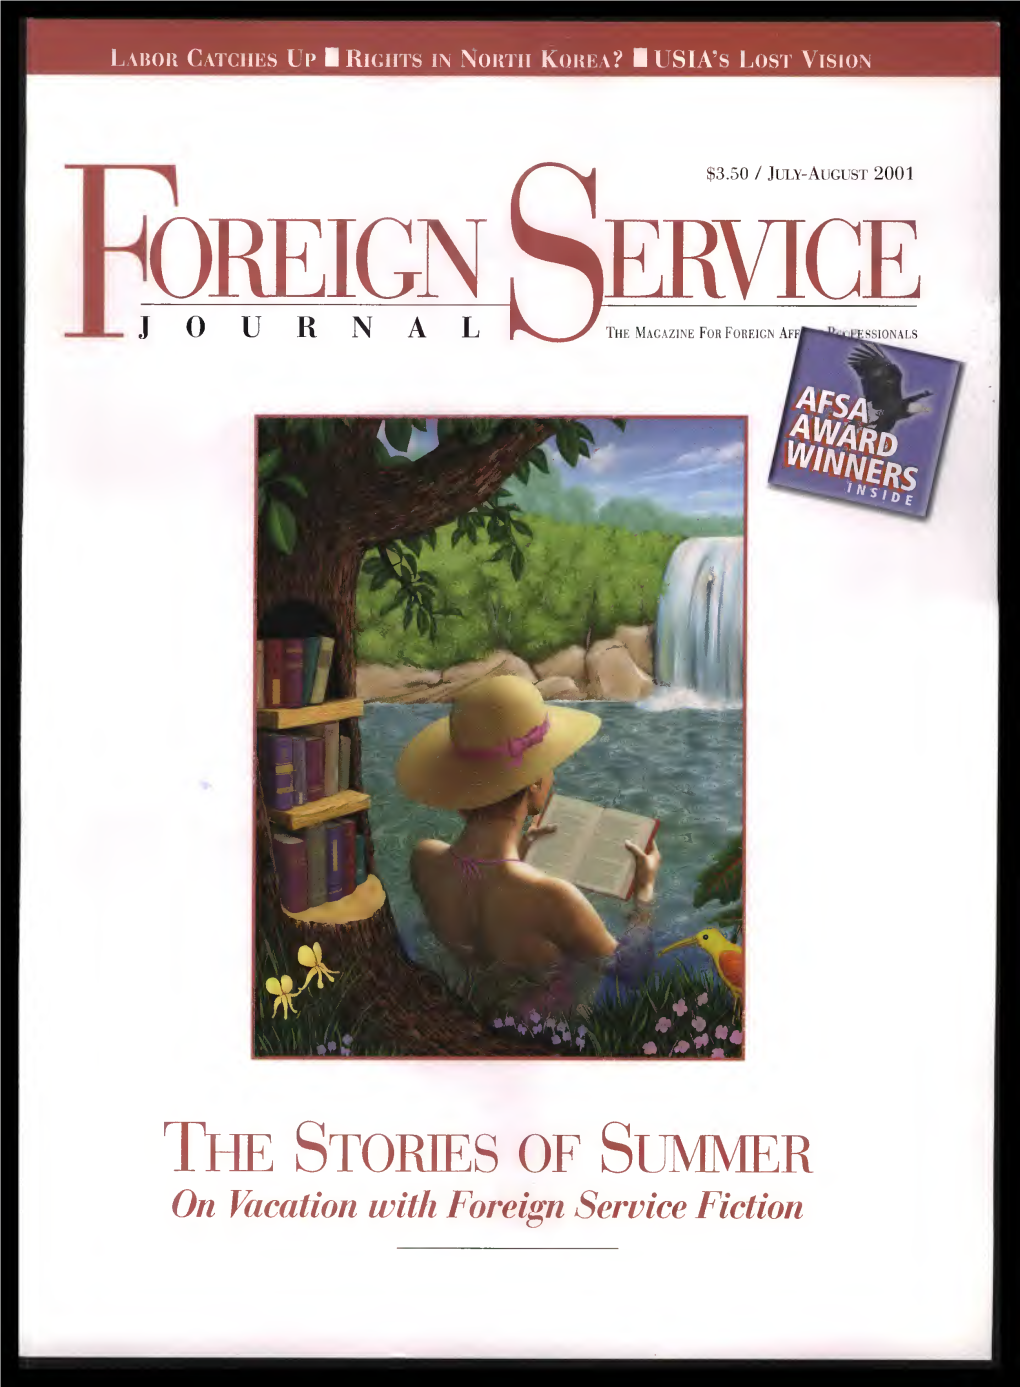 The Foreign Service Journal, July-August 2001